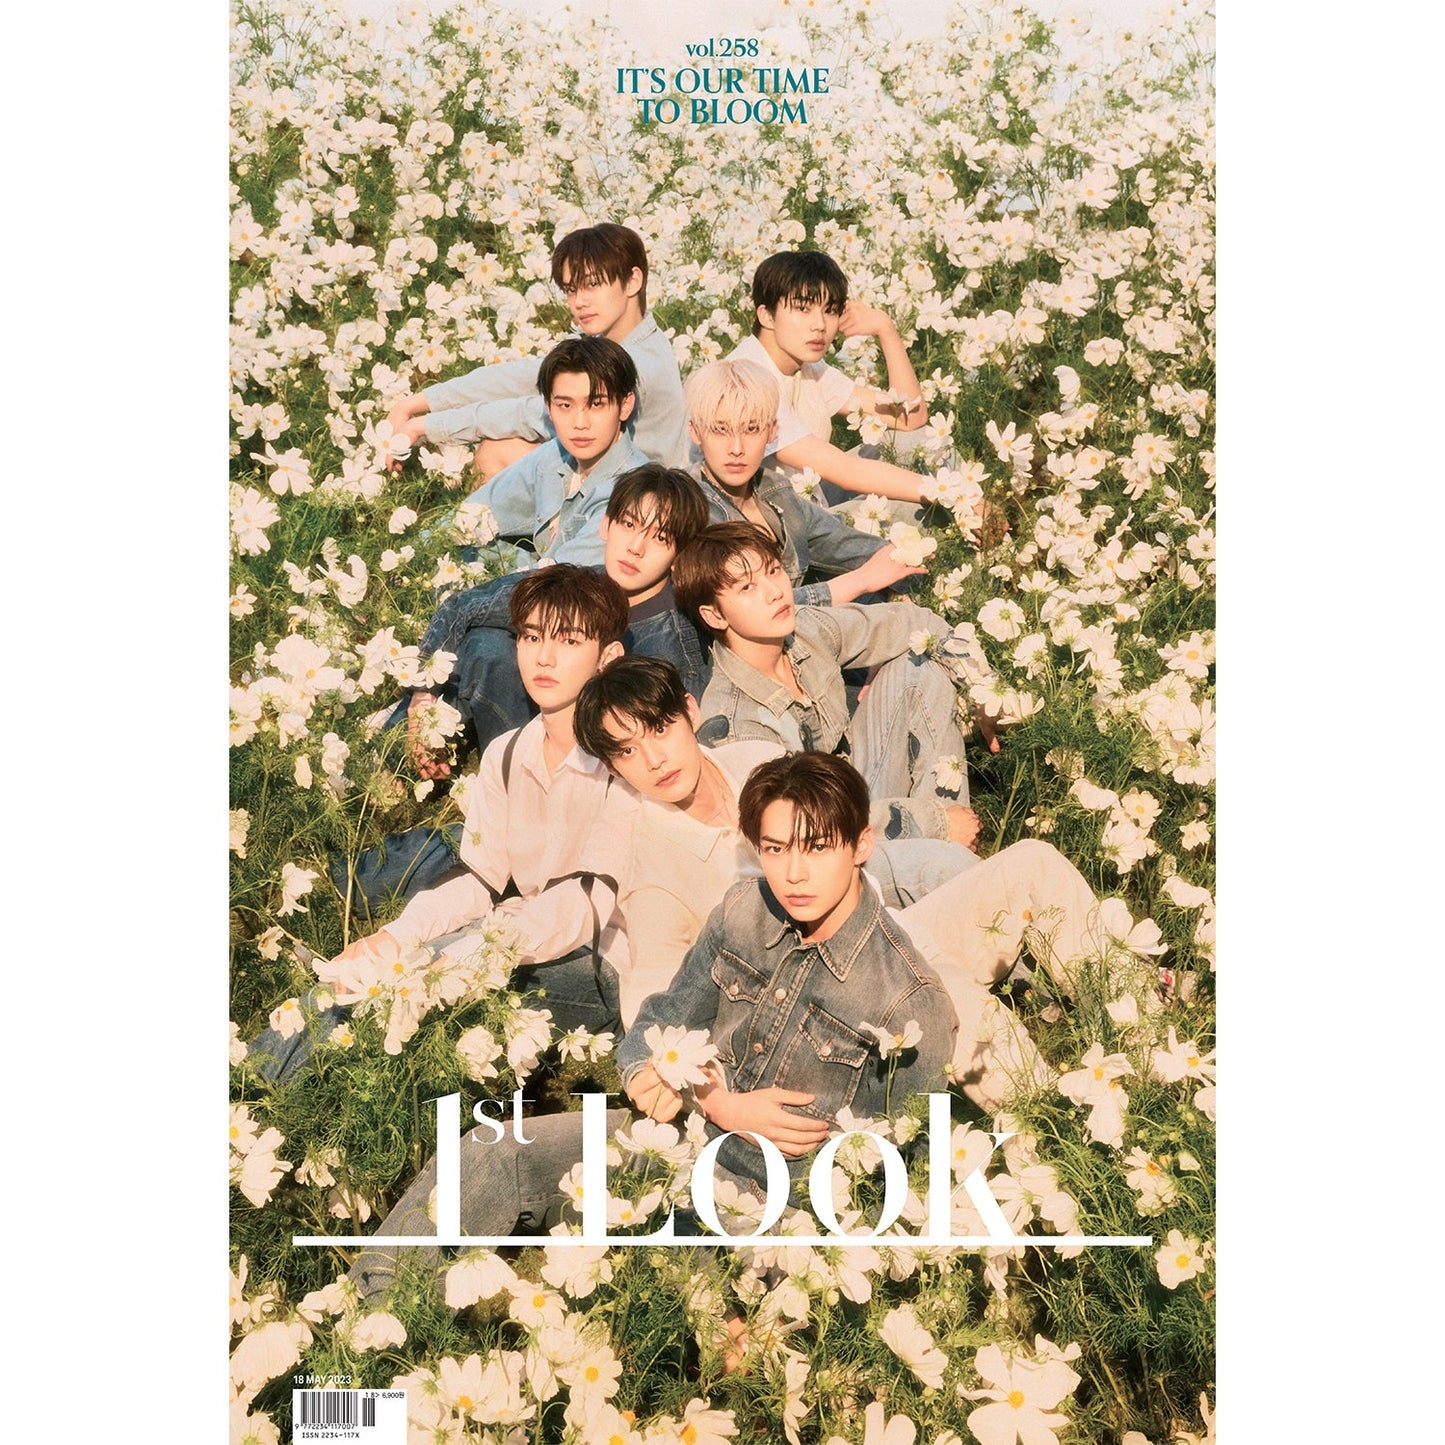 1ST LOOK 'VOL. 258 - ZB1' COVER